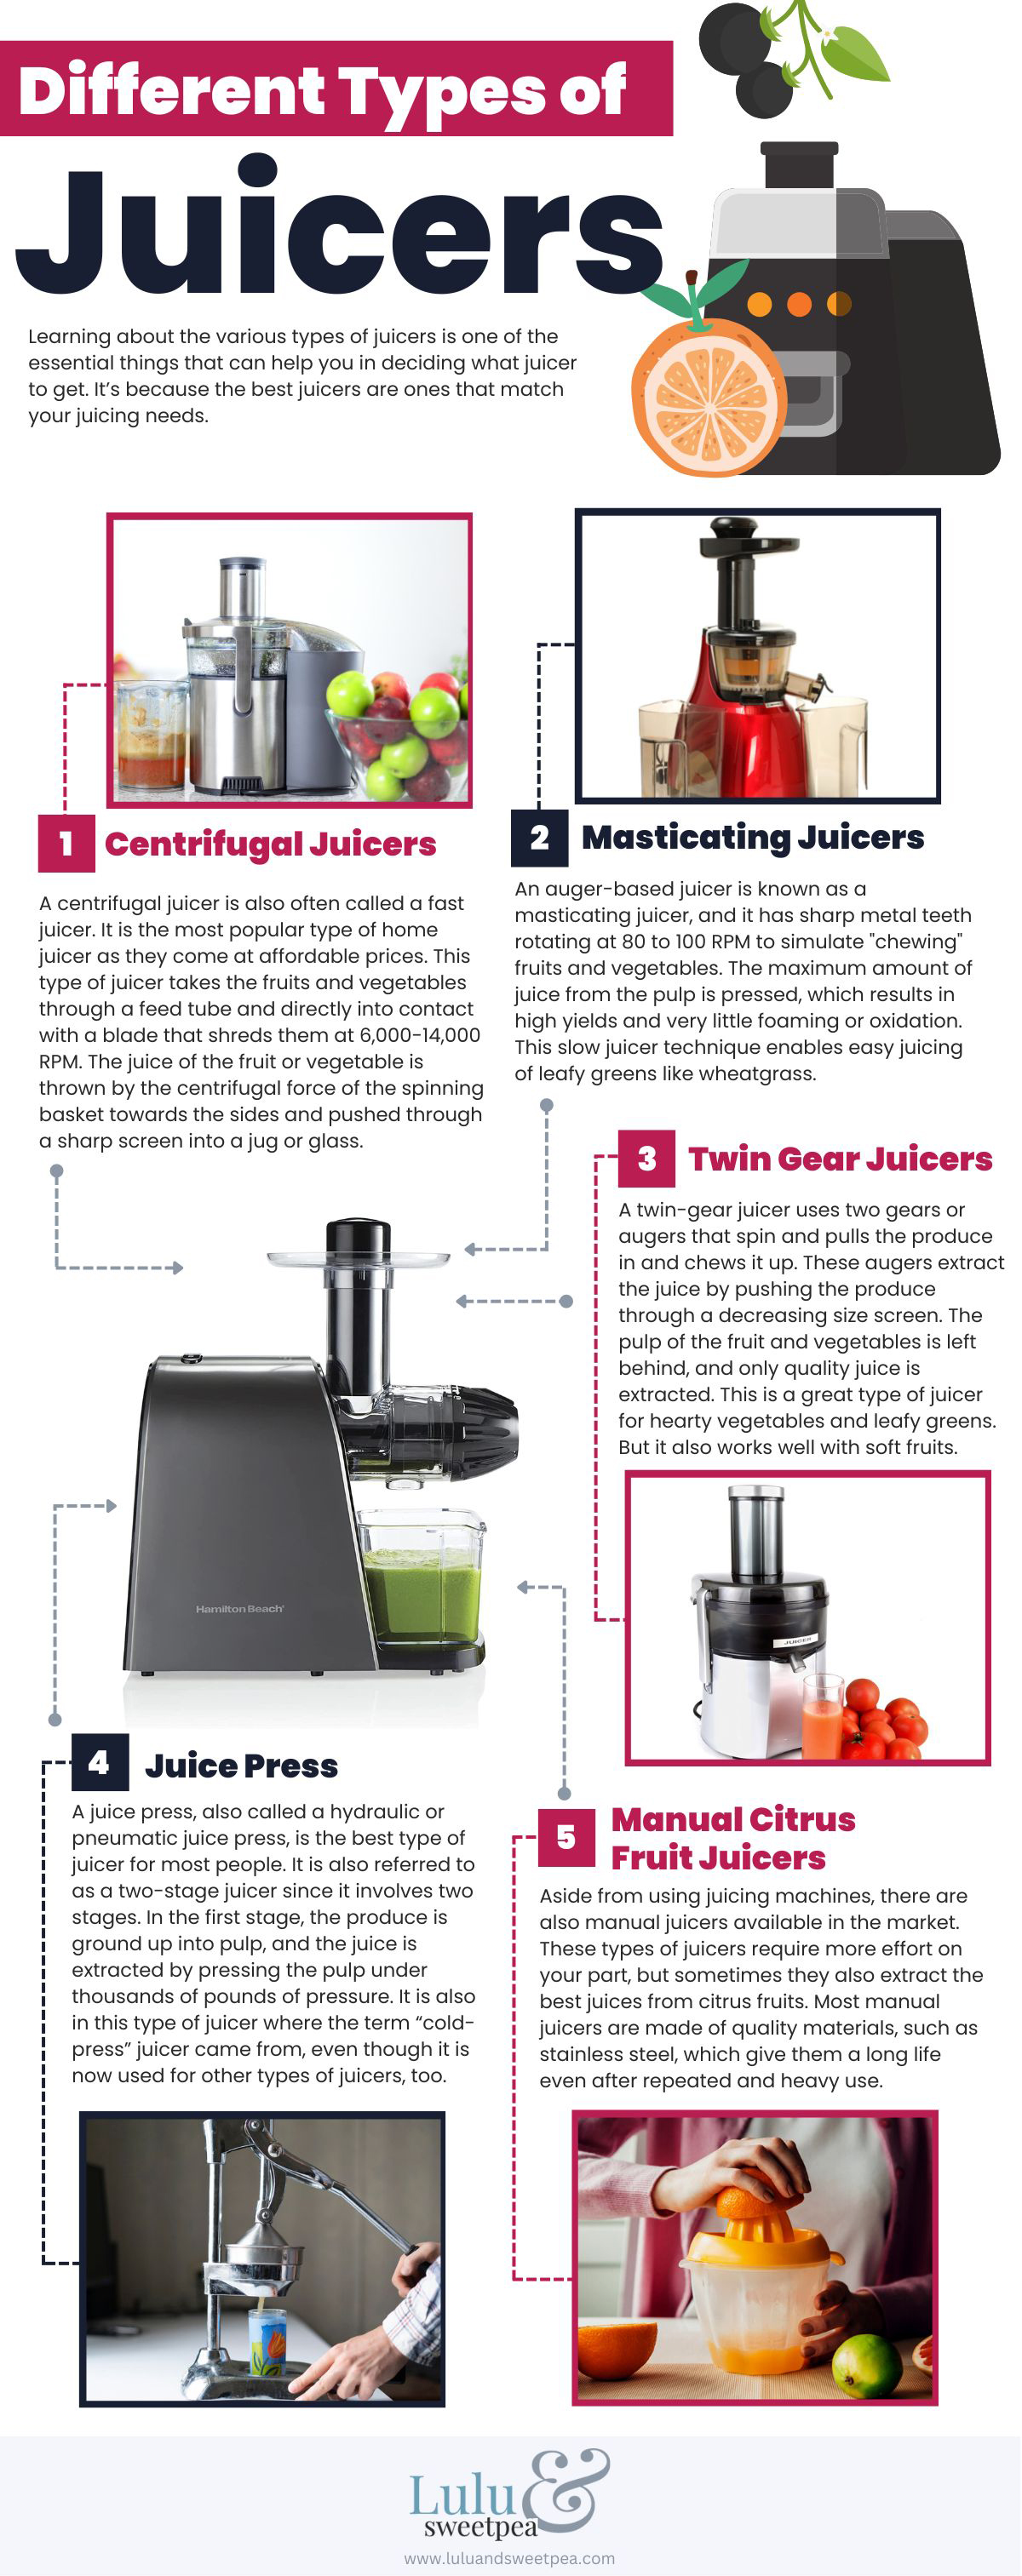 Different Types of Juicers